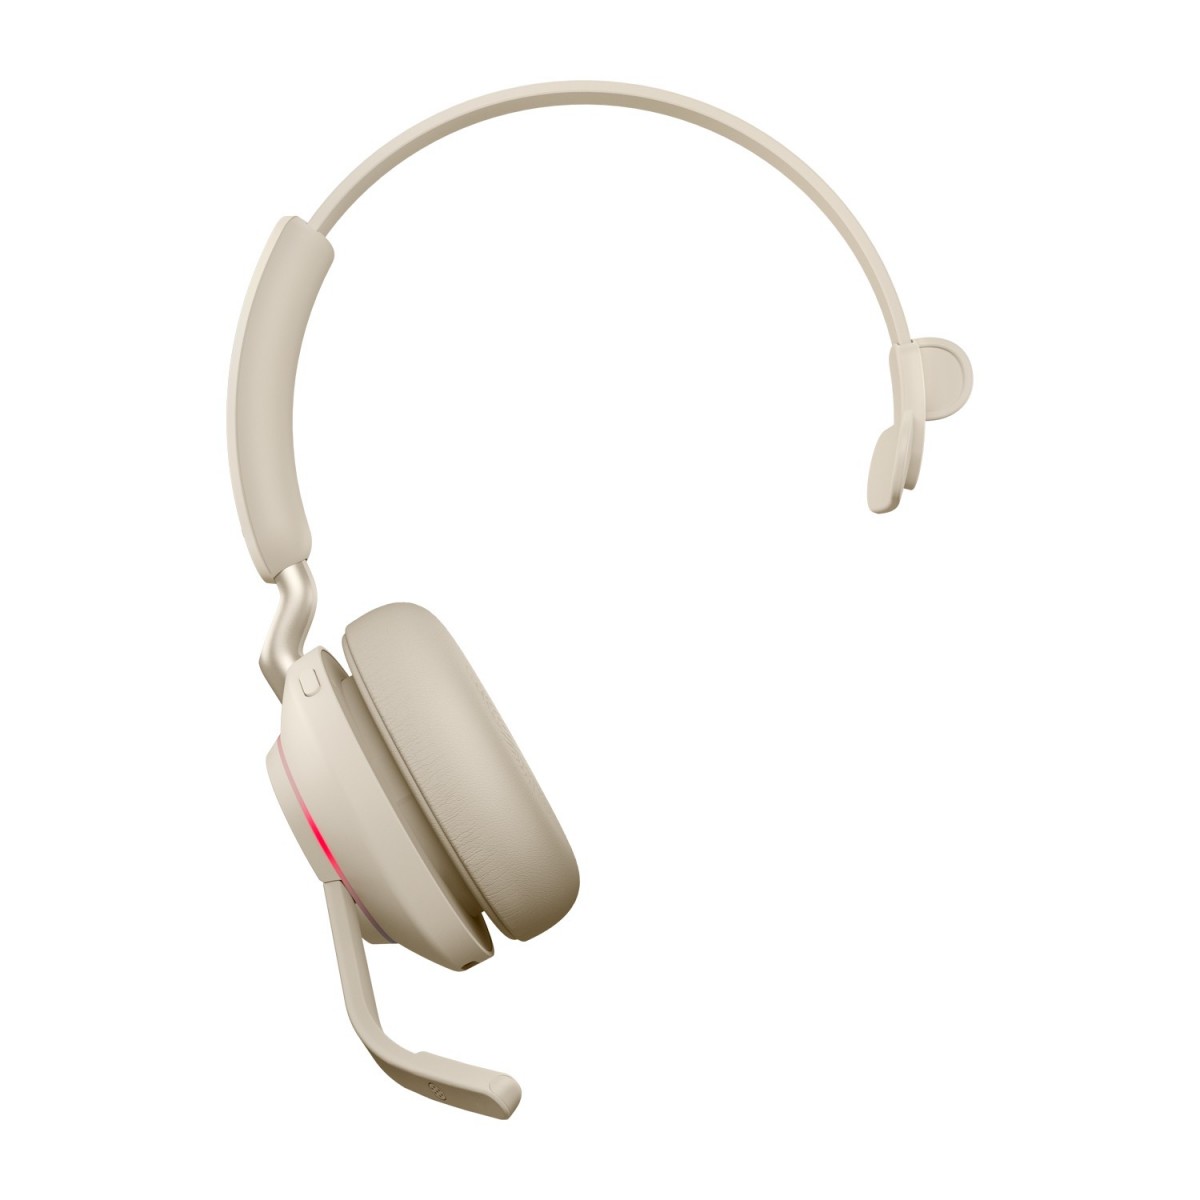 Jabra Evolve2 65 - MS Mono - Headset - Head-band - Office/Call center - Beige - Monaural - Bluetooth pairing - Play/Pause - Trac